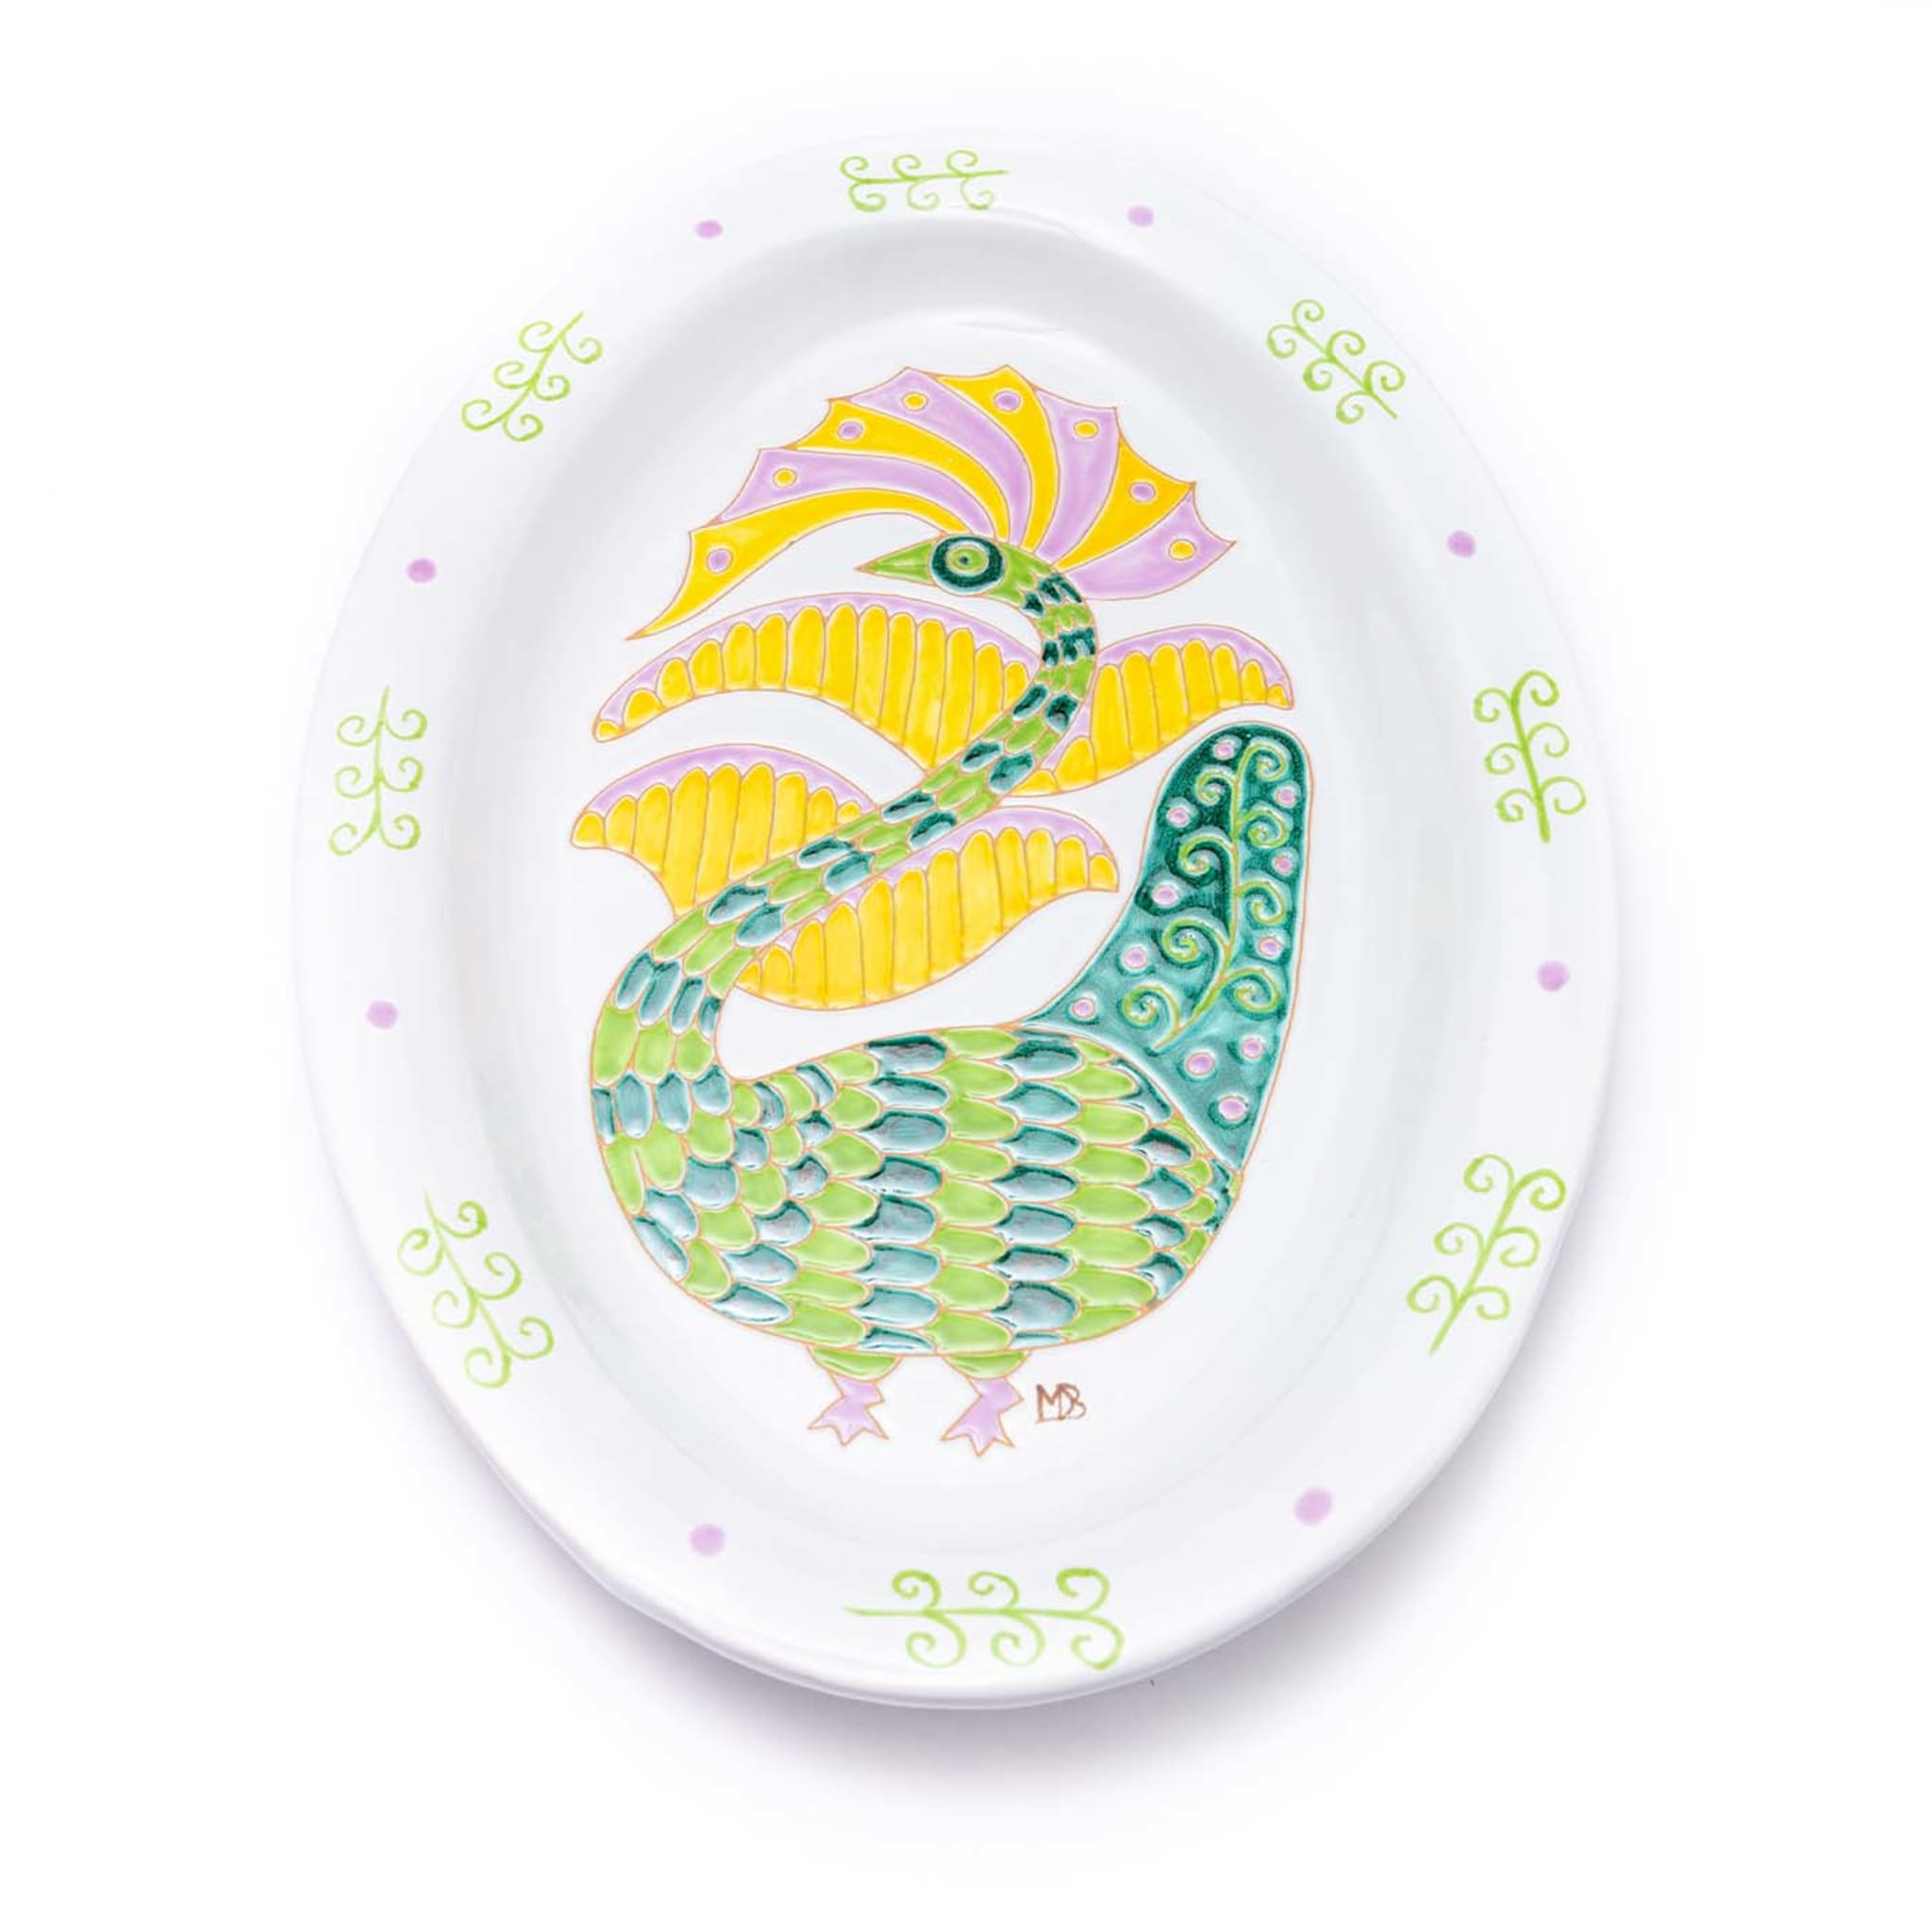 Le Fenici Oval Green and Yellow Tray - Alternative view 1